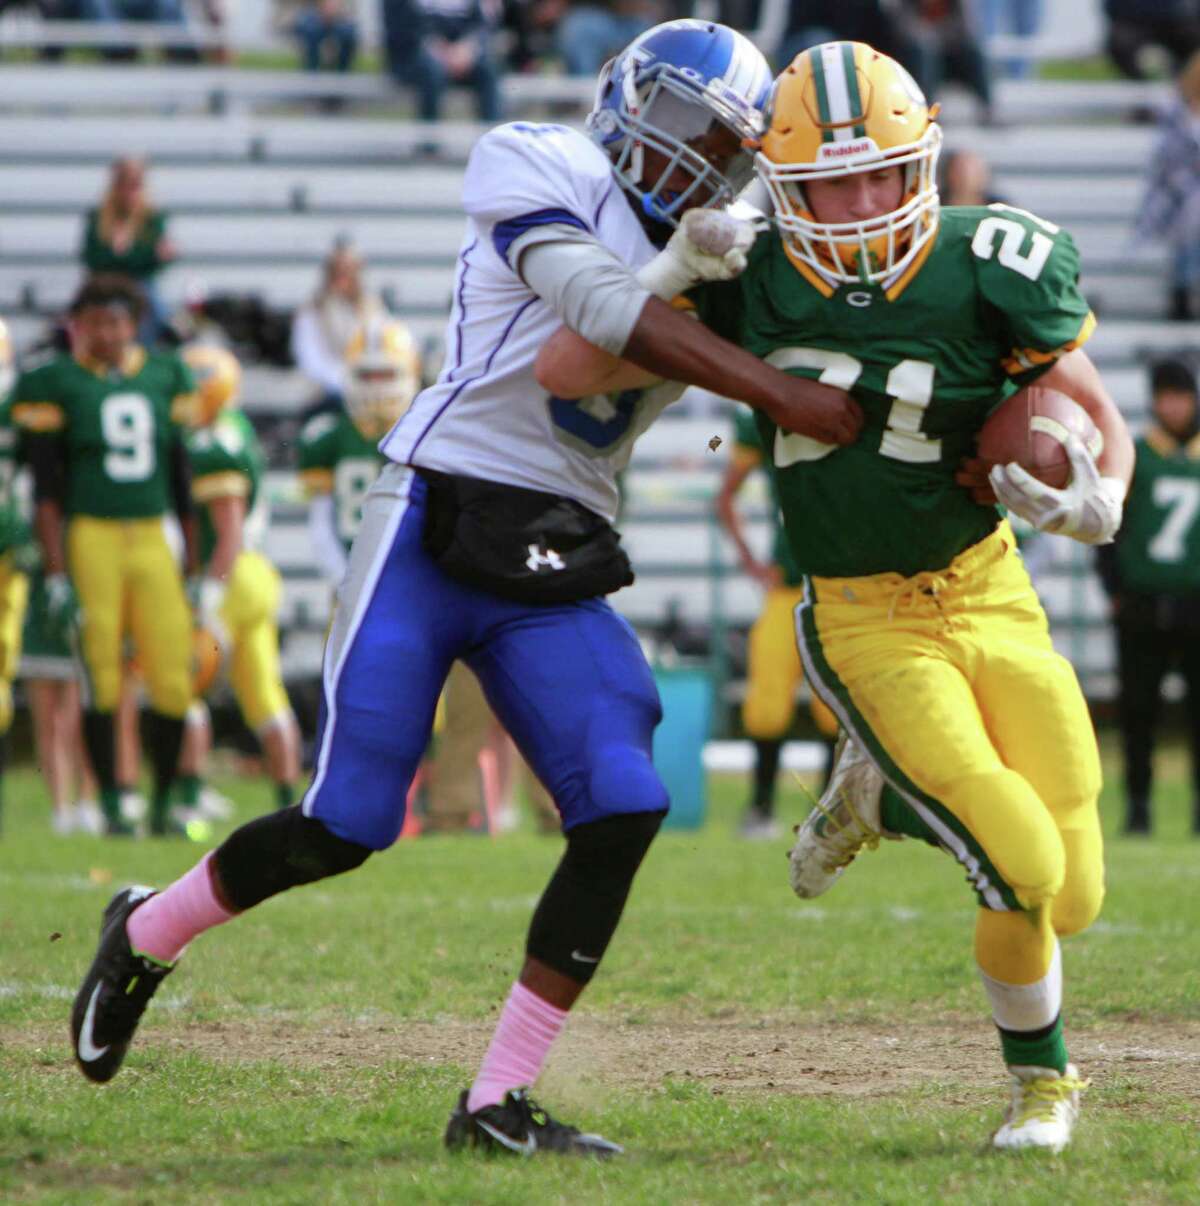 Trinity Catholic defeated Fairfield Ludlowe 37-20 in a varsity football game on Oct.24, 2015 in Stamford.